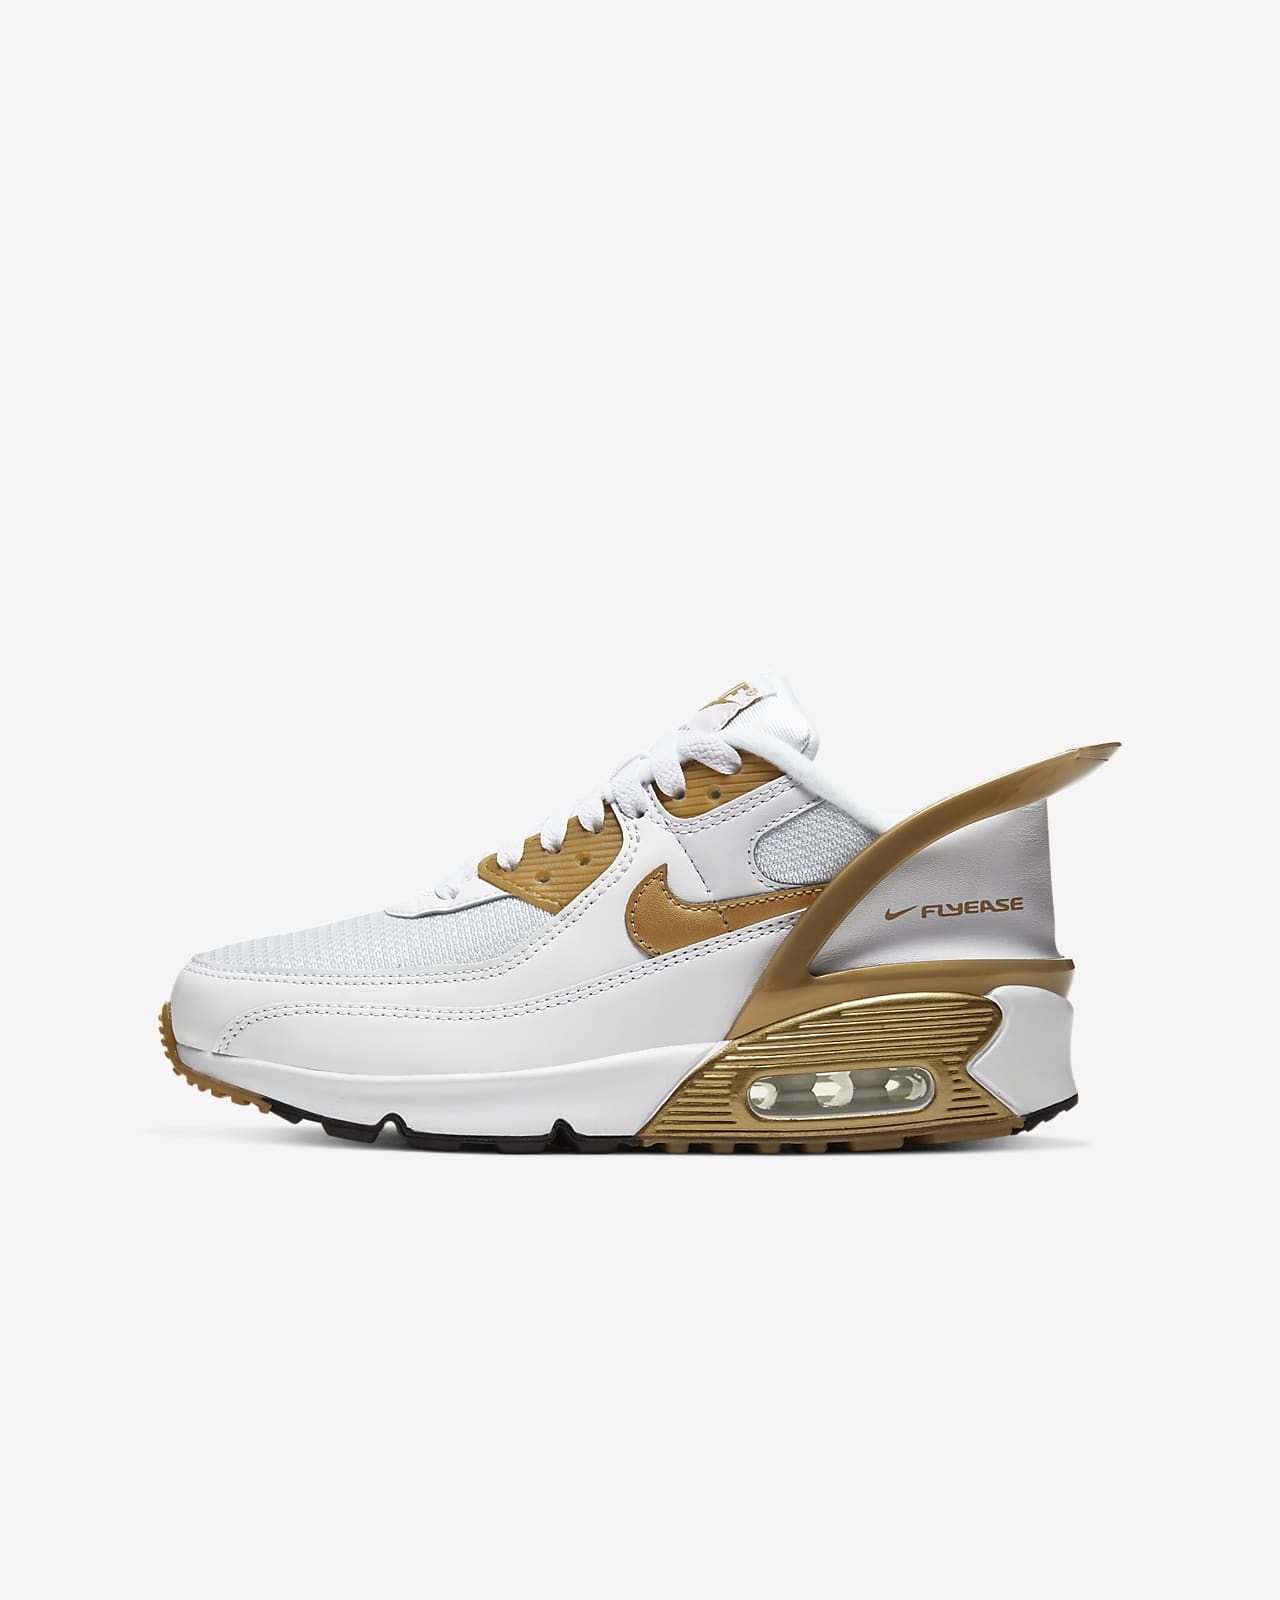 nike air max 90 flyease white and gold